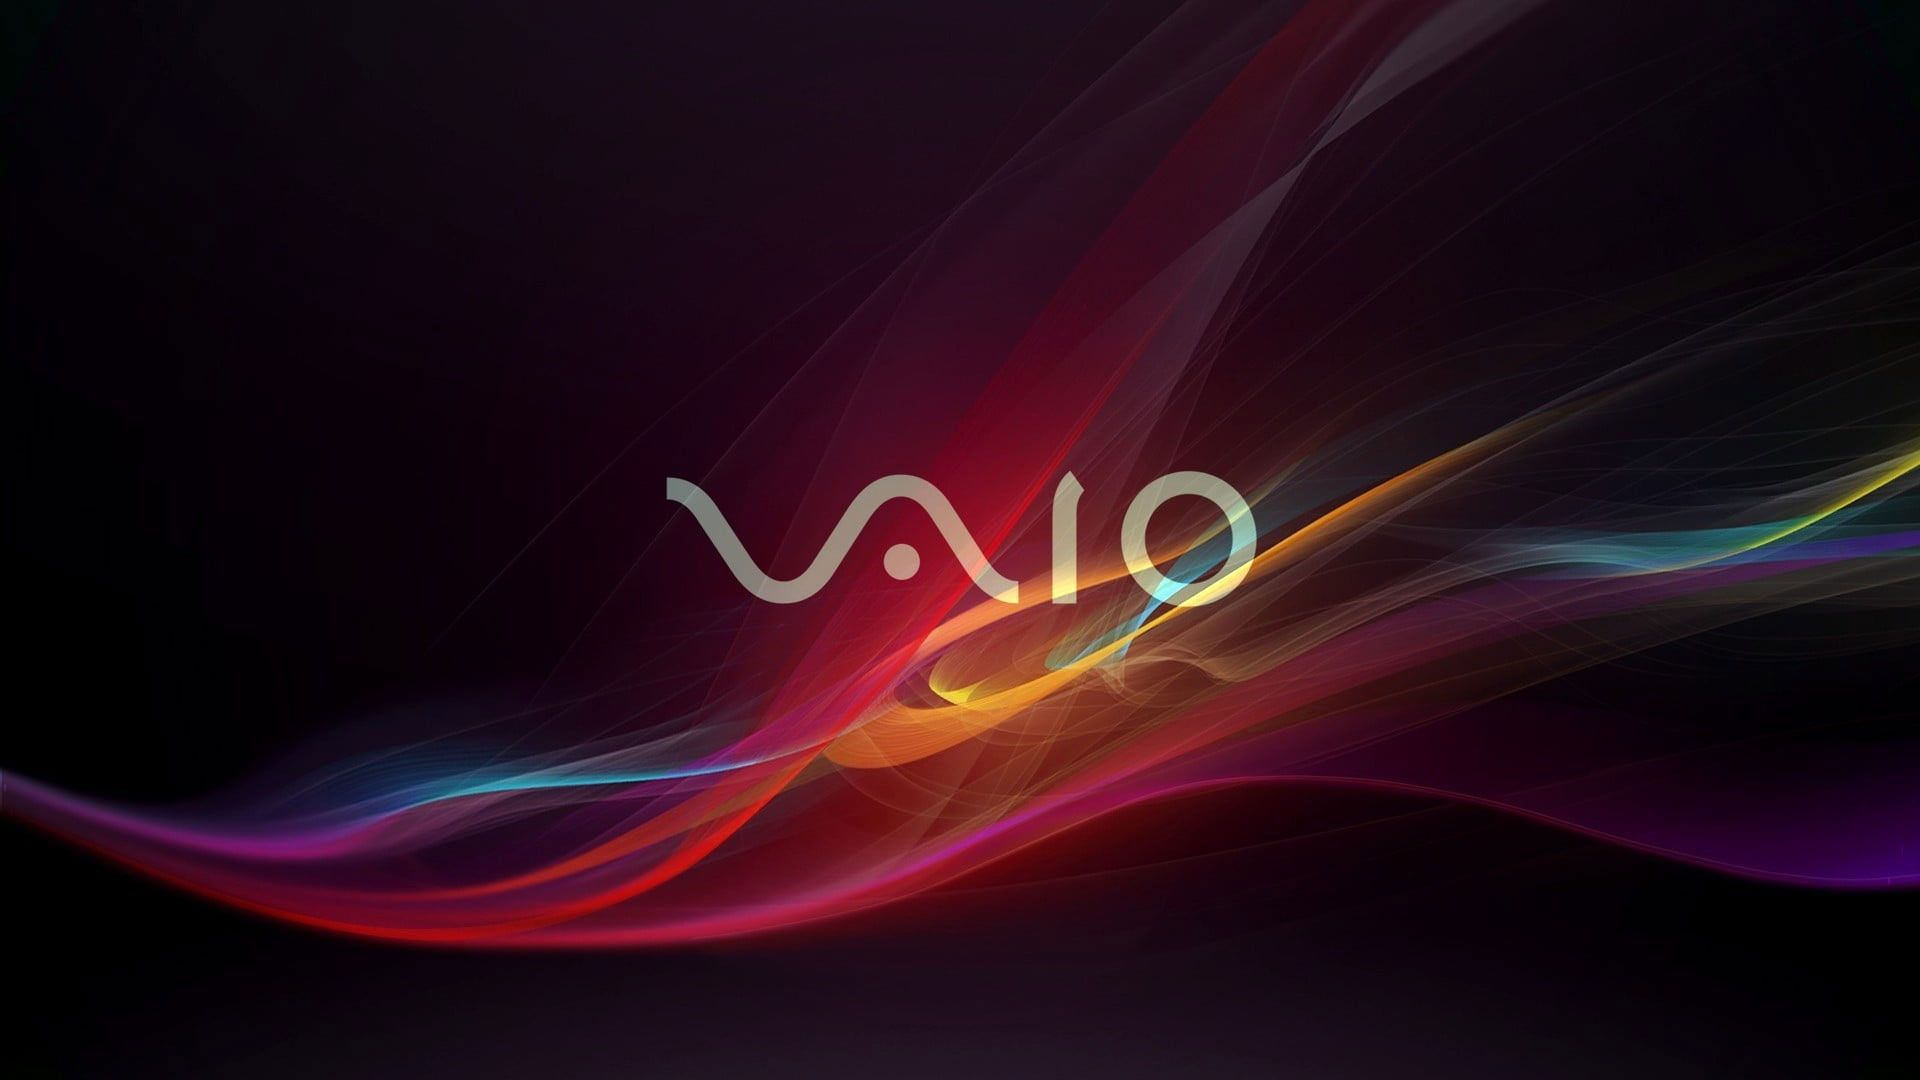 1920x1080 Sony Vaio logo wallpaper, colorful, shapes, digital art, abstract, motion | Motion wallpapers, Wallpaper, Abstract